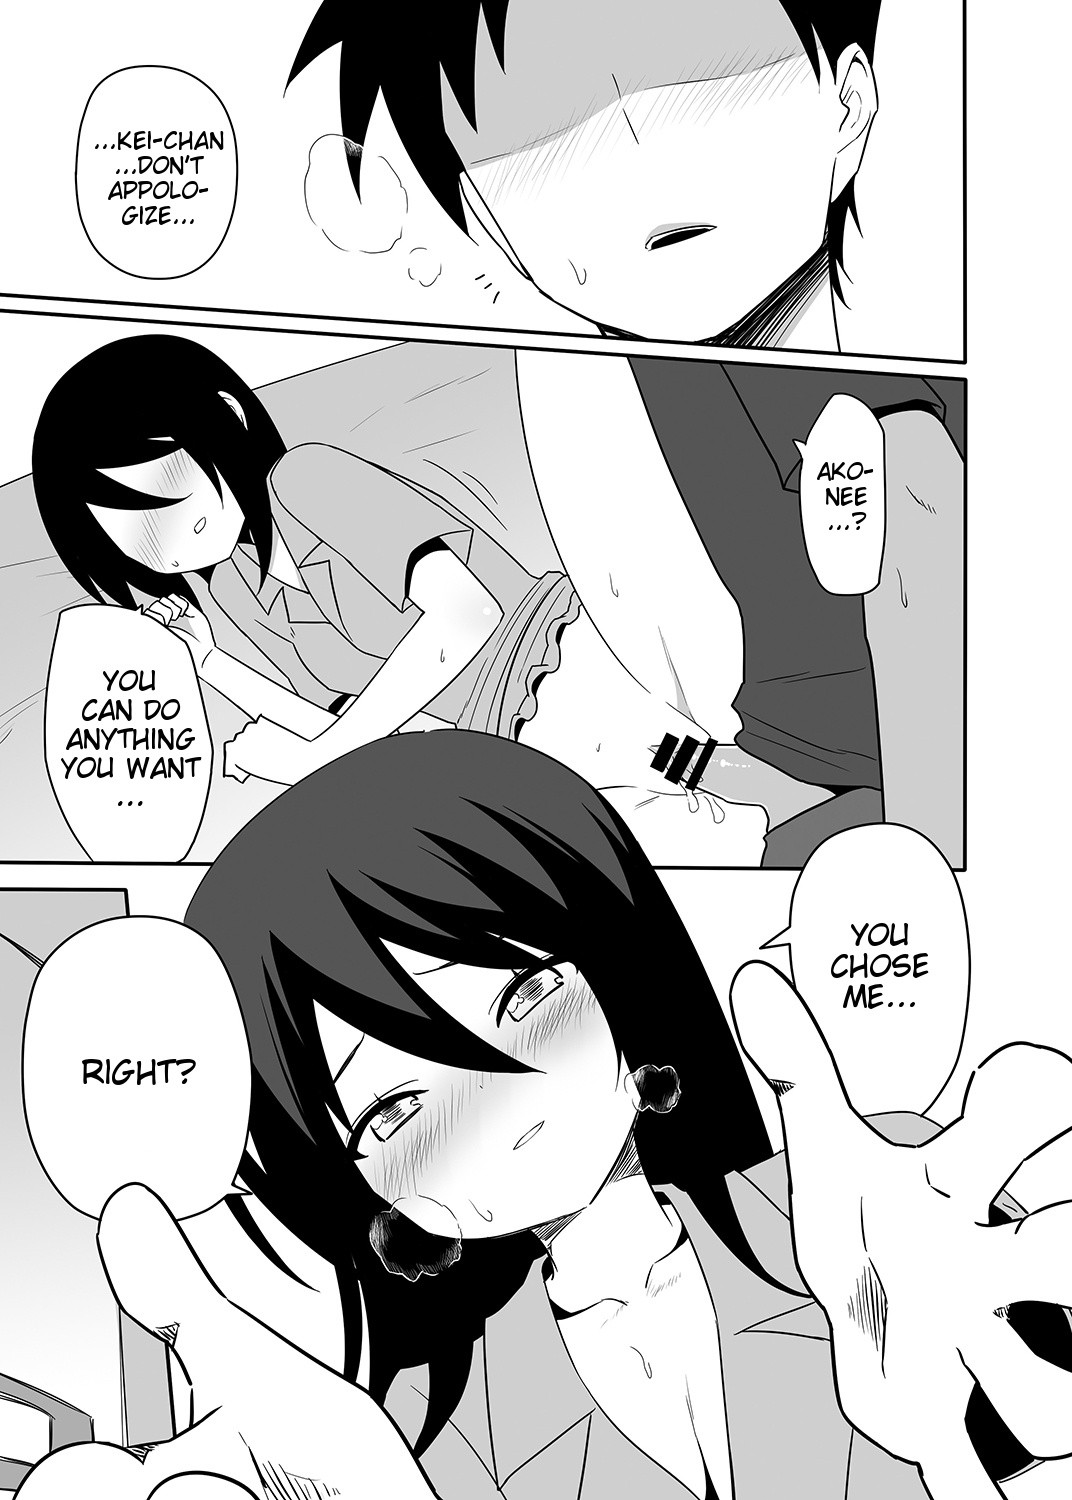 The day I went over the line with Ako-nee hentai manga picture 14